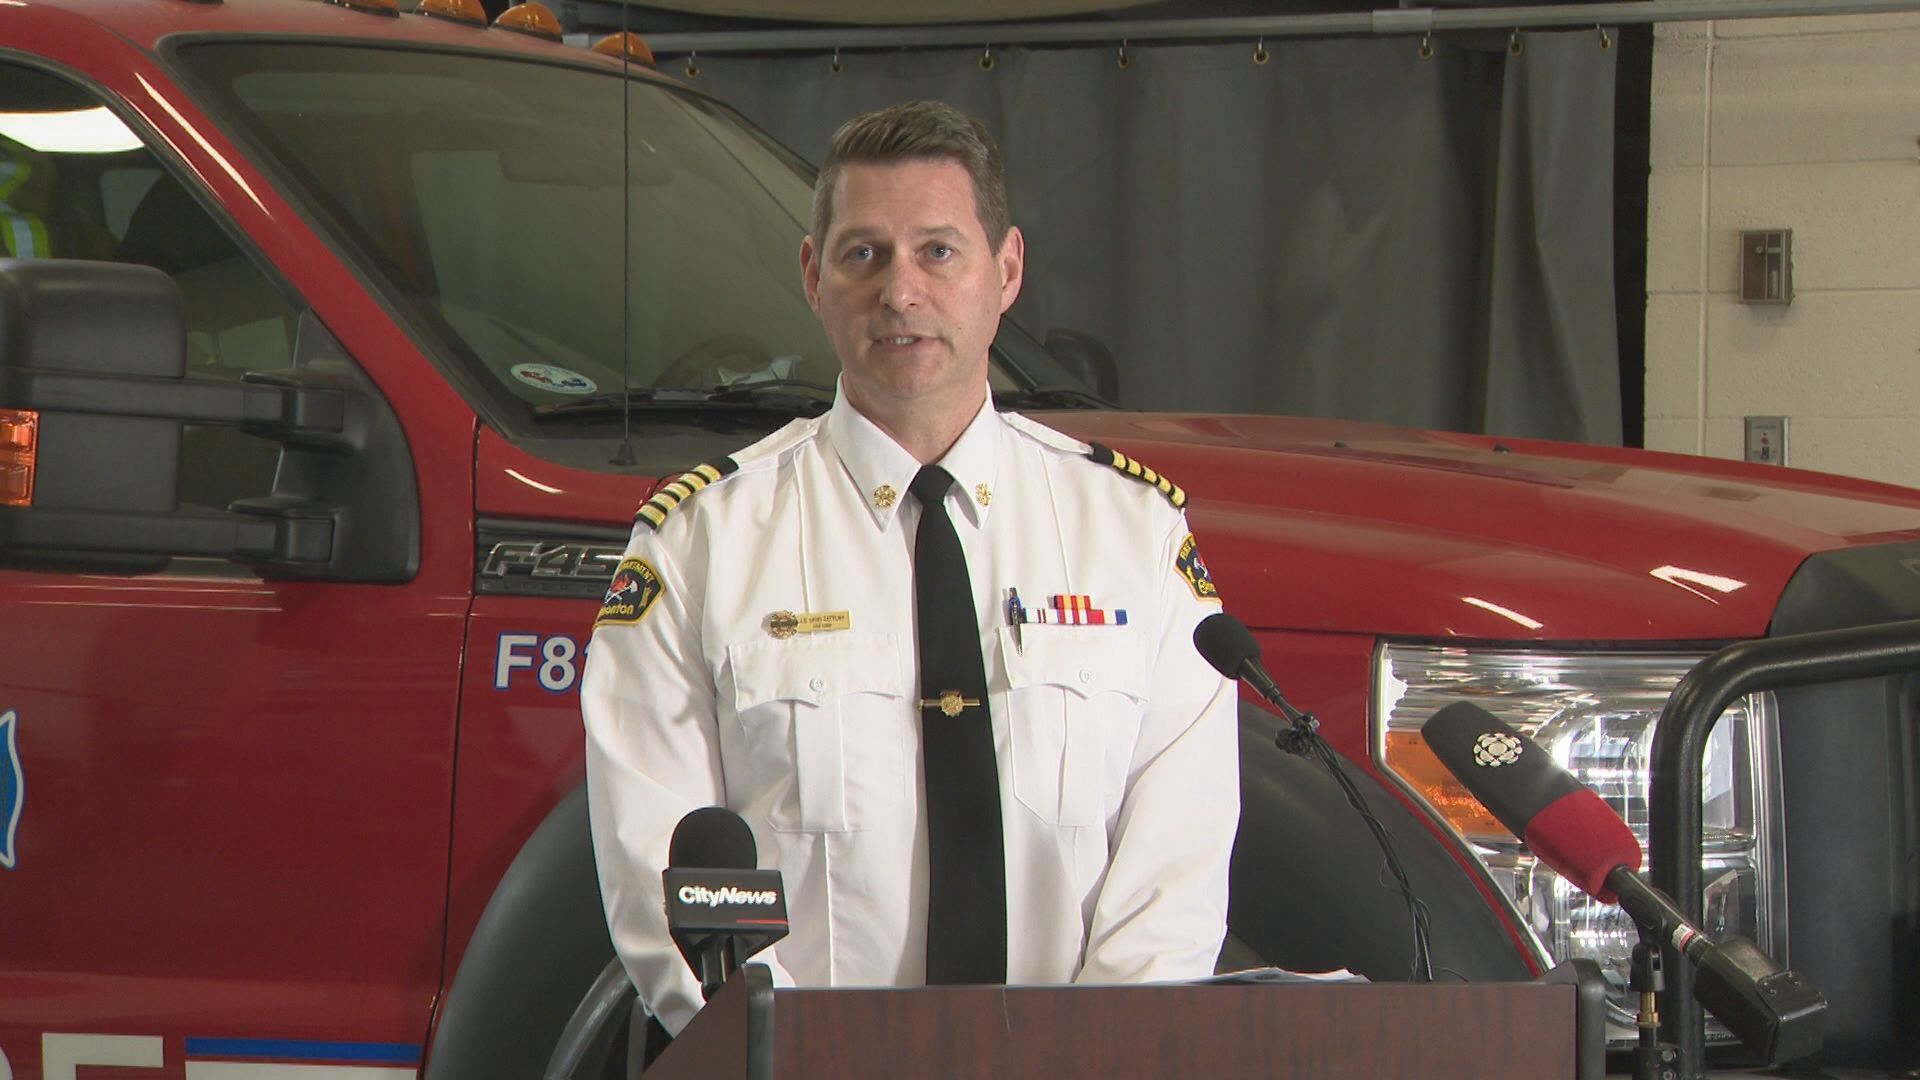 Edmonton is preparing for wildfire threat, but so should you: fire chief